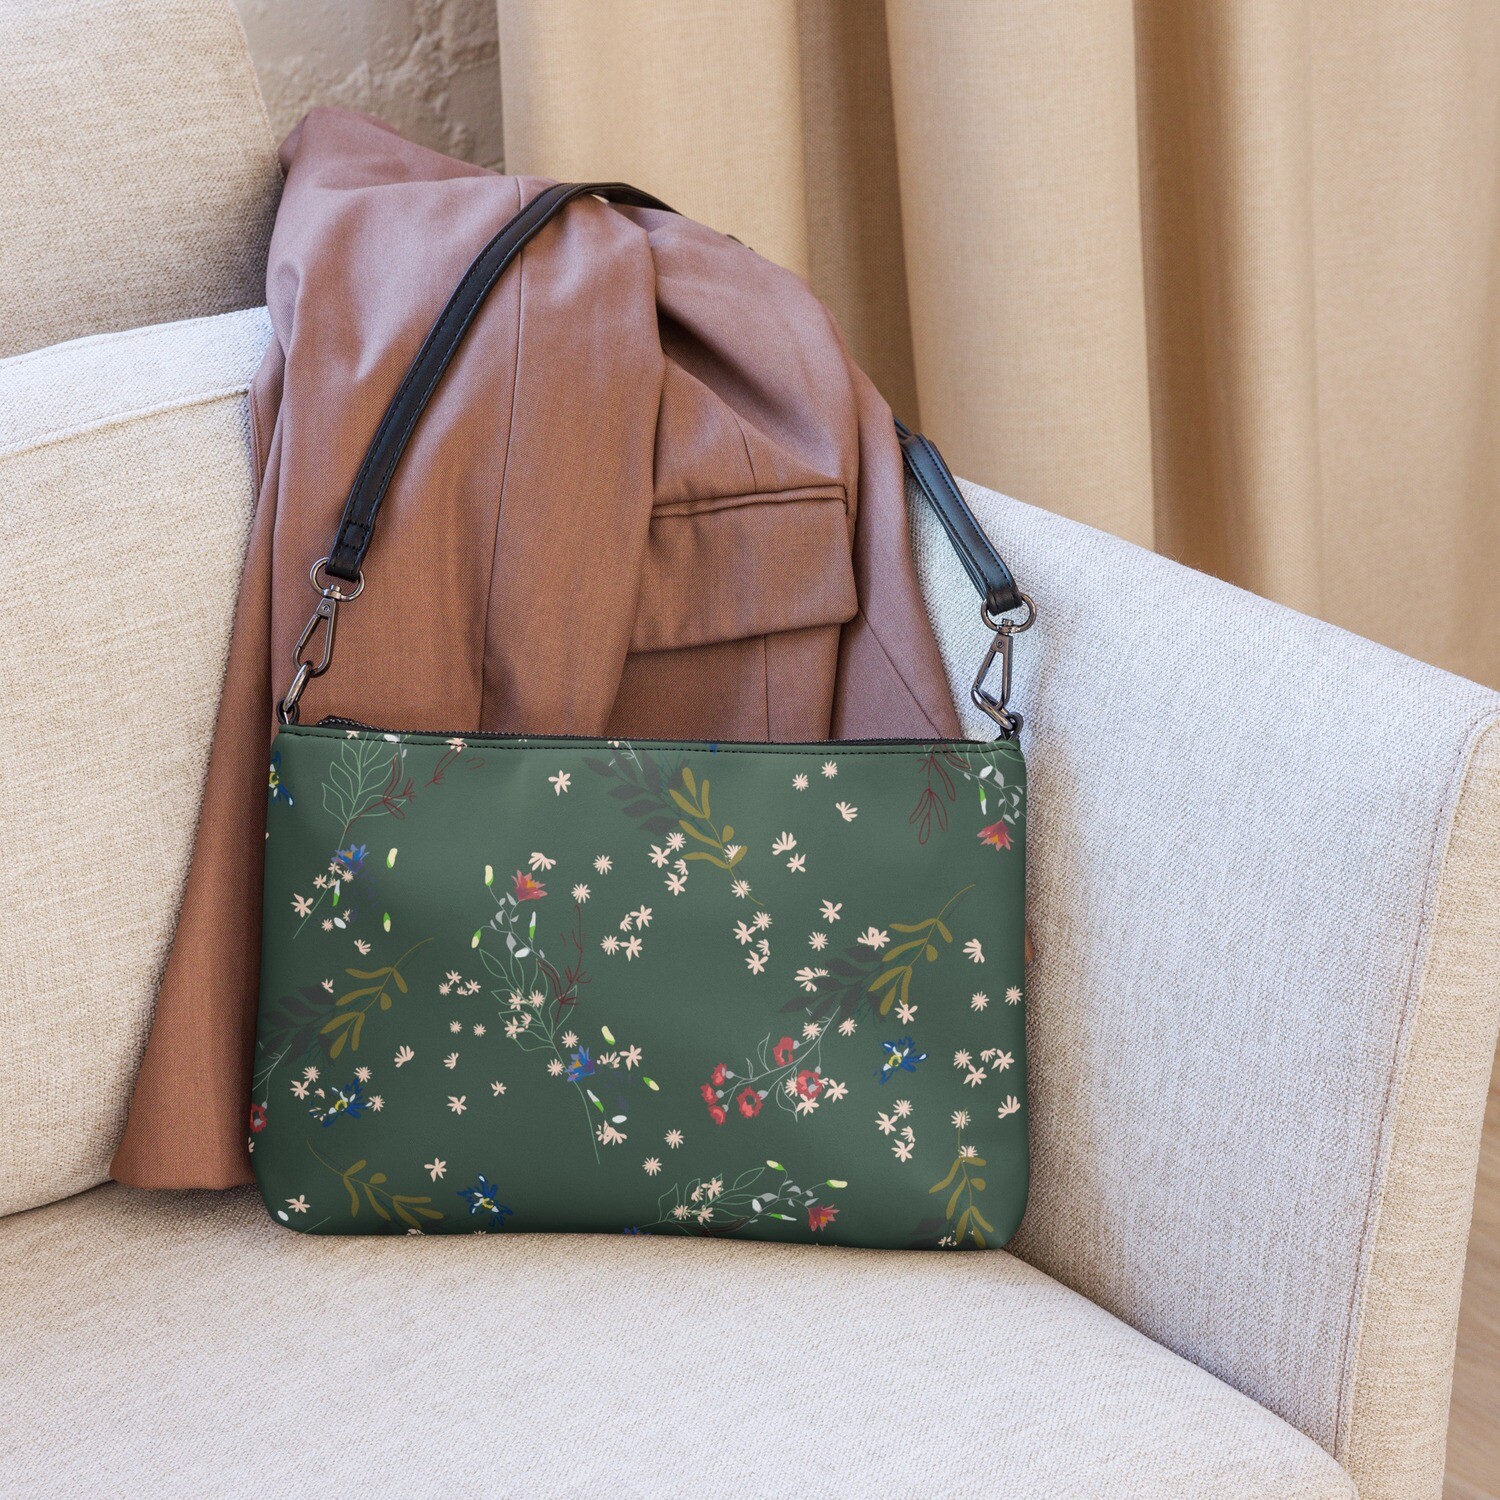 Olive green crossbody bag with meadow flowers